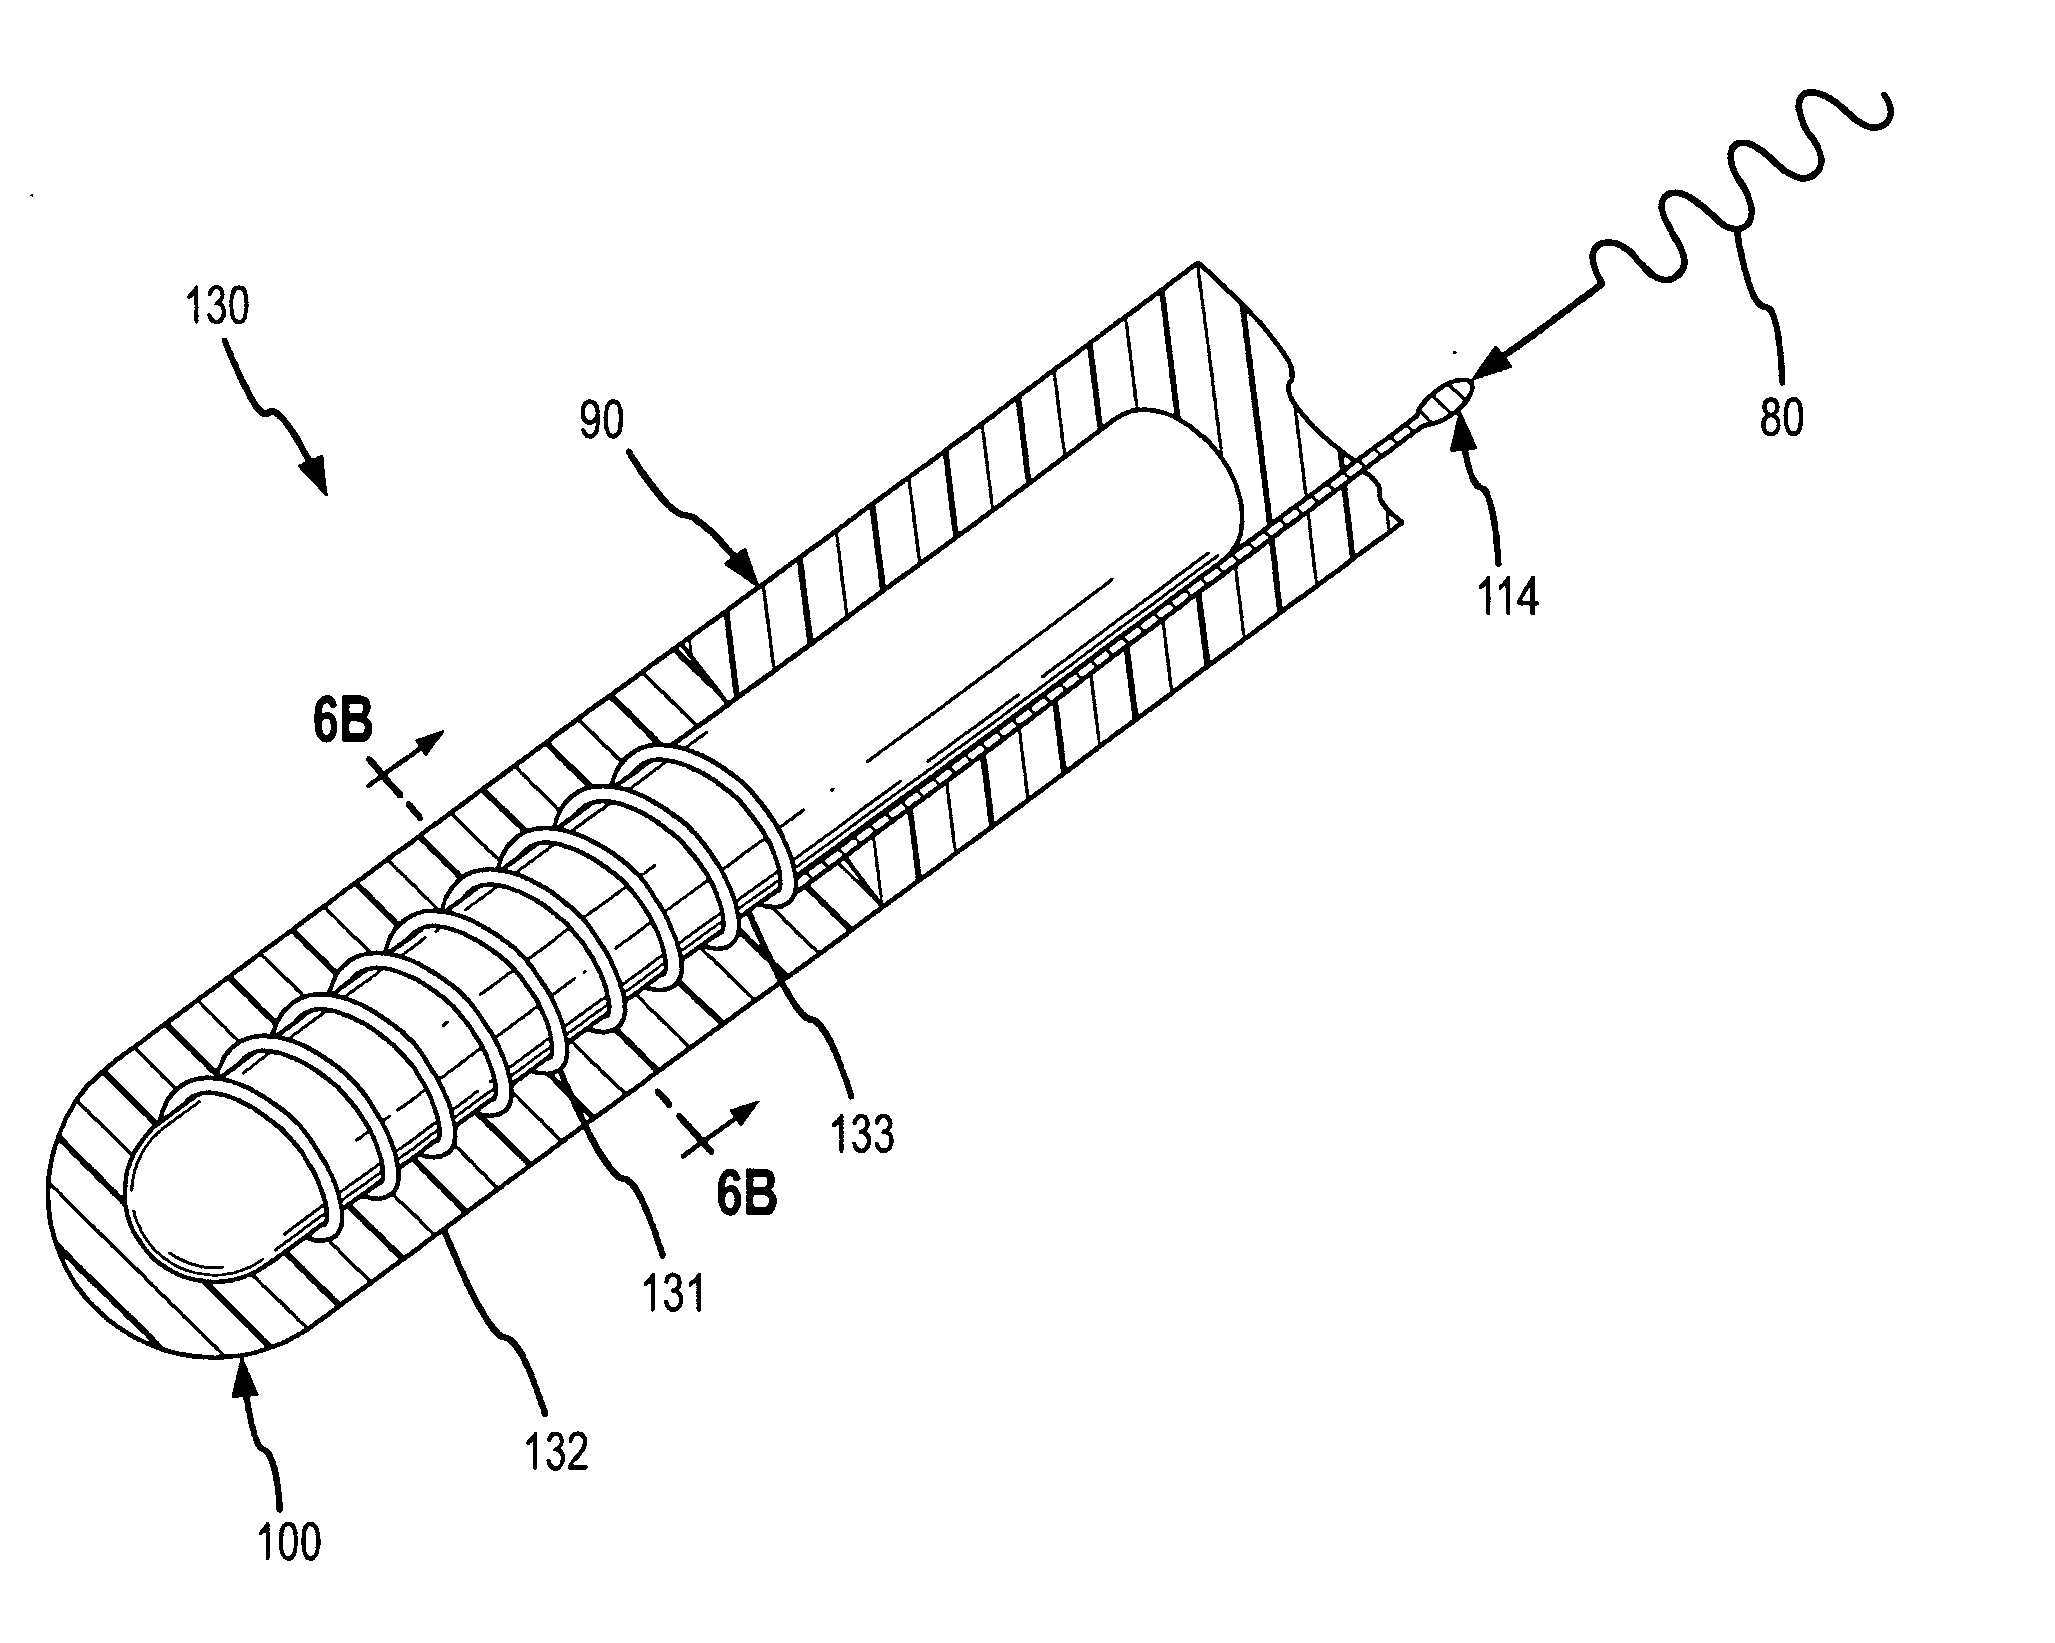 Pressure-sensitive conductive composite electrode and method for ablation